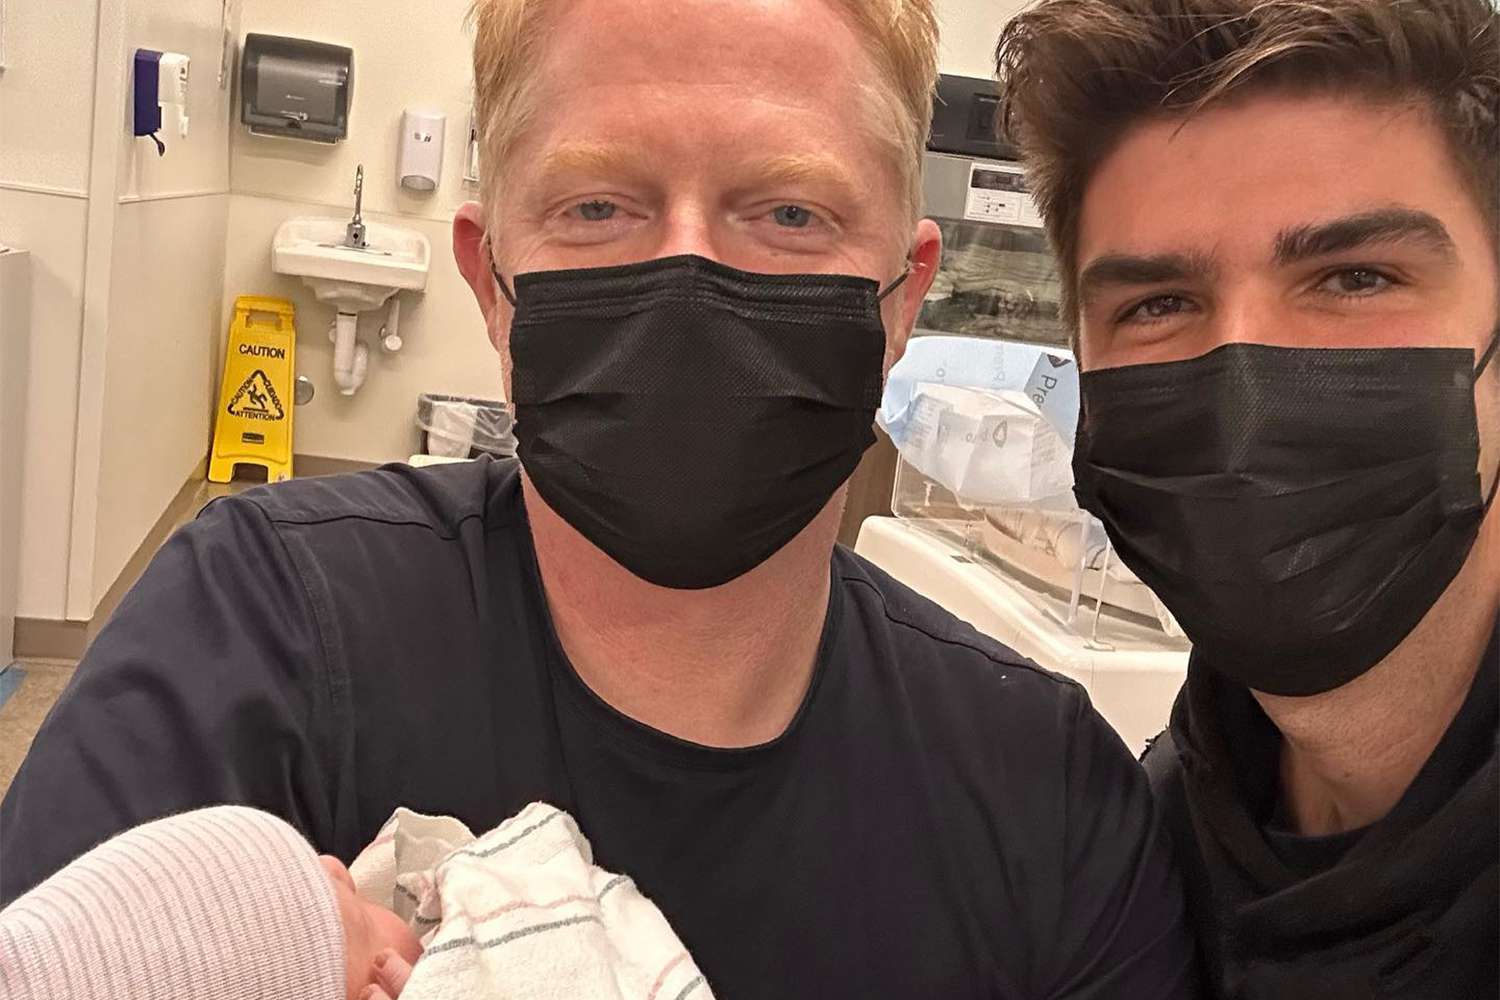 https://www.instagram.com/p/ClADsNJvn27/ jessetyler Verified Sad to be away from my @takemeoutbway fam tonight but we ran off to welcome our newest little one, Sullivan Louis Ferguson-Mikita. A special thanks to @drshahinghadir for helping us grow our family & our incredible surrogate and all of the nurses and doctors. We are overjoyed to be a family of four. My incredible understudy @timmytwright will be on tonight and tomorrow and I will be back in the ball game on Thursday 11/17. I know Tim has you all in wonderful hands. GO EMPIRES! @takemeoutbway Edited · 1h